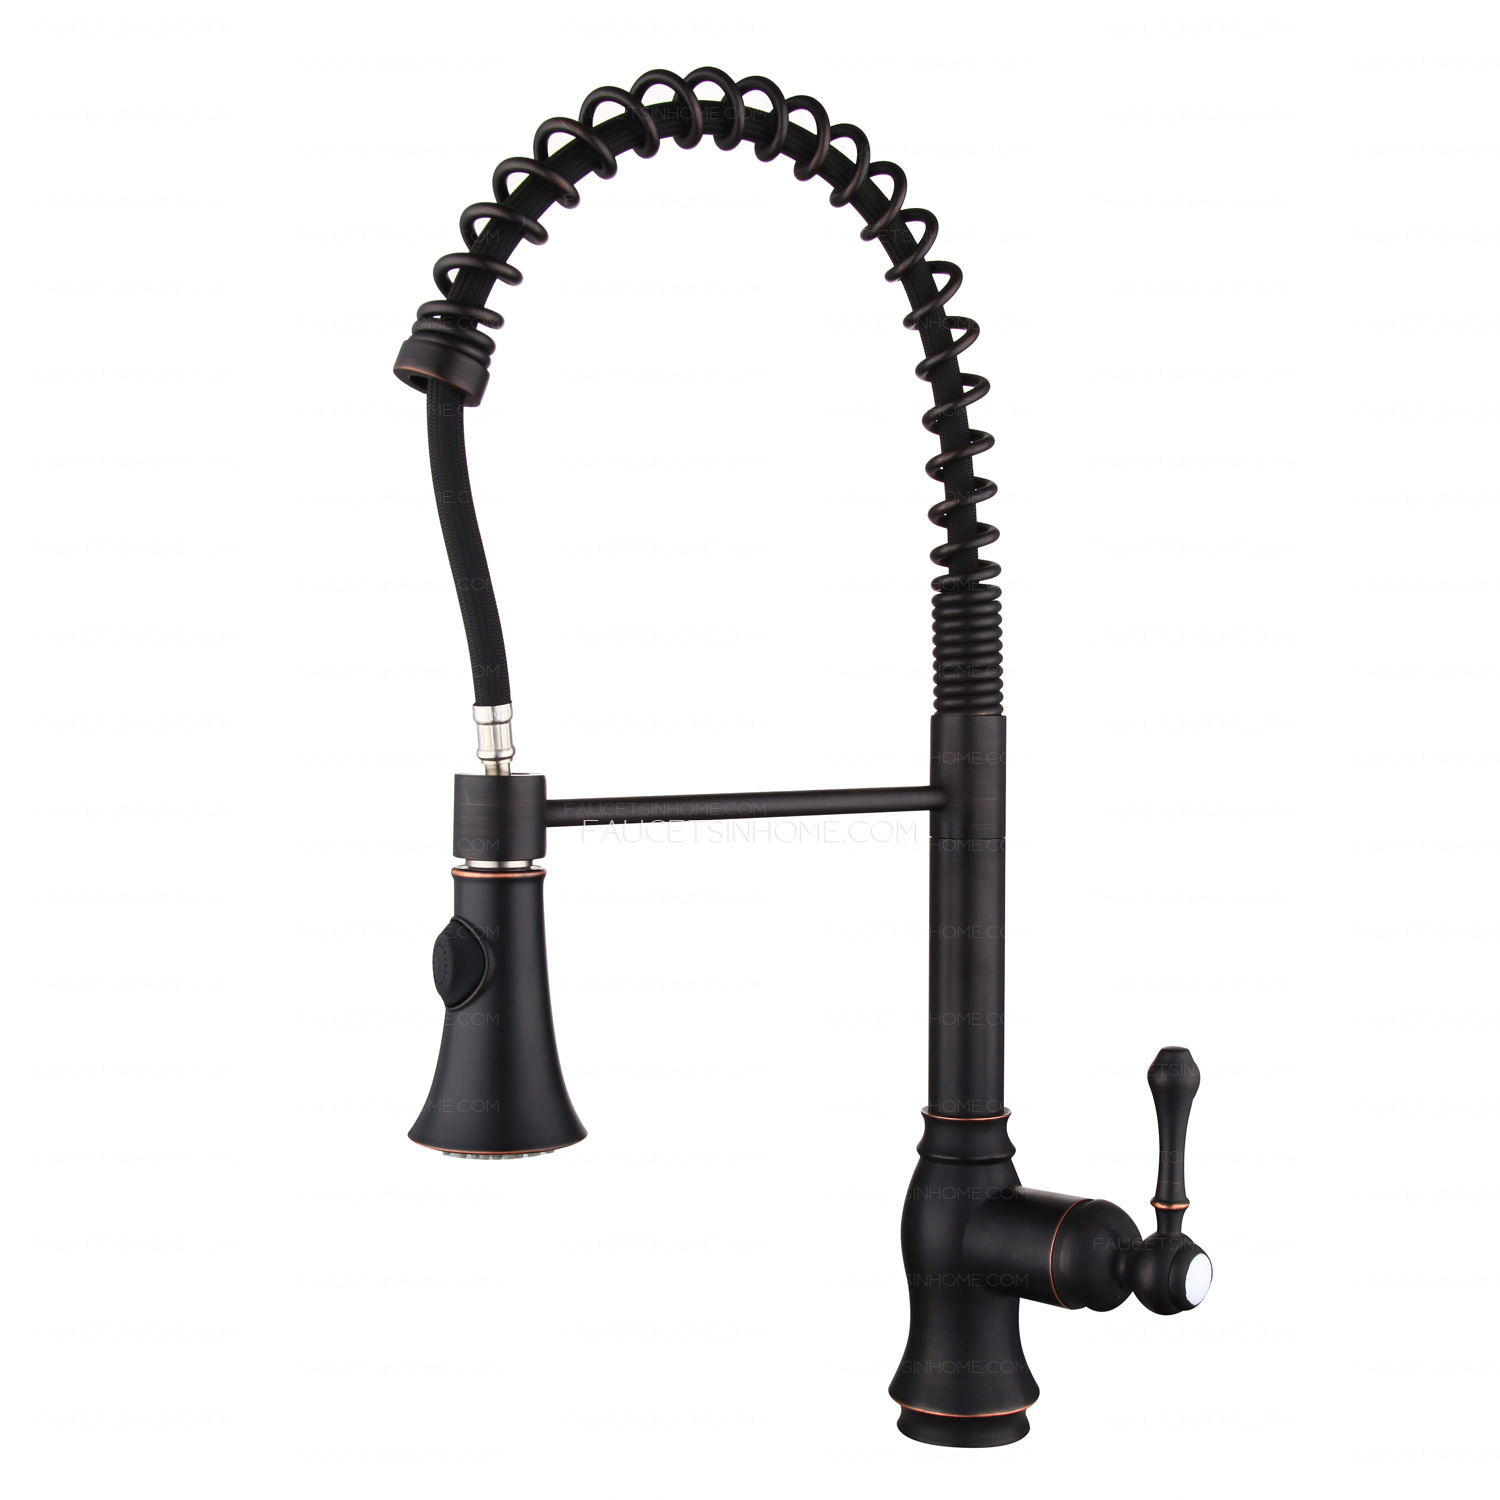 Matte Black  Chrome  Spring Pull Out Kitchen Faucet Black Handle Pull Out